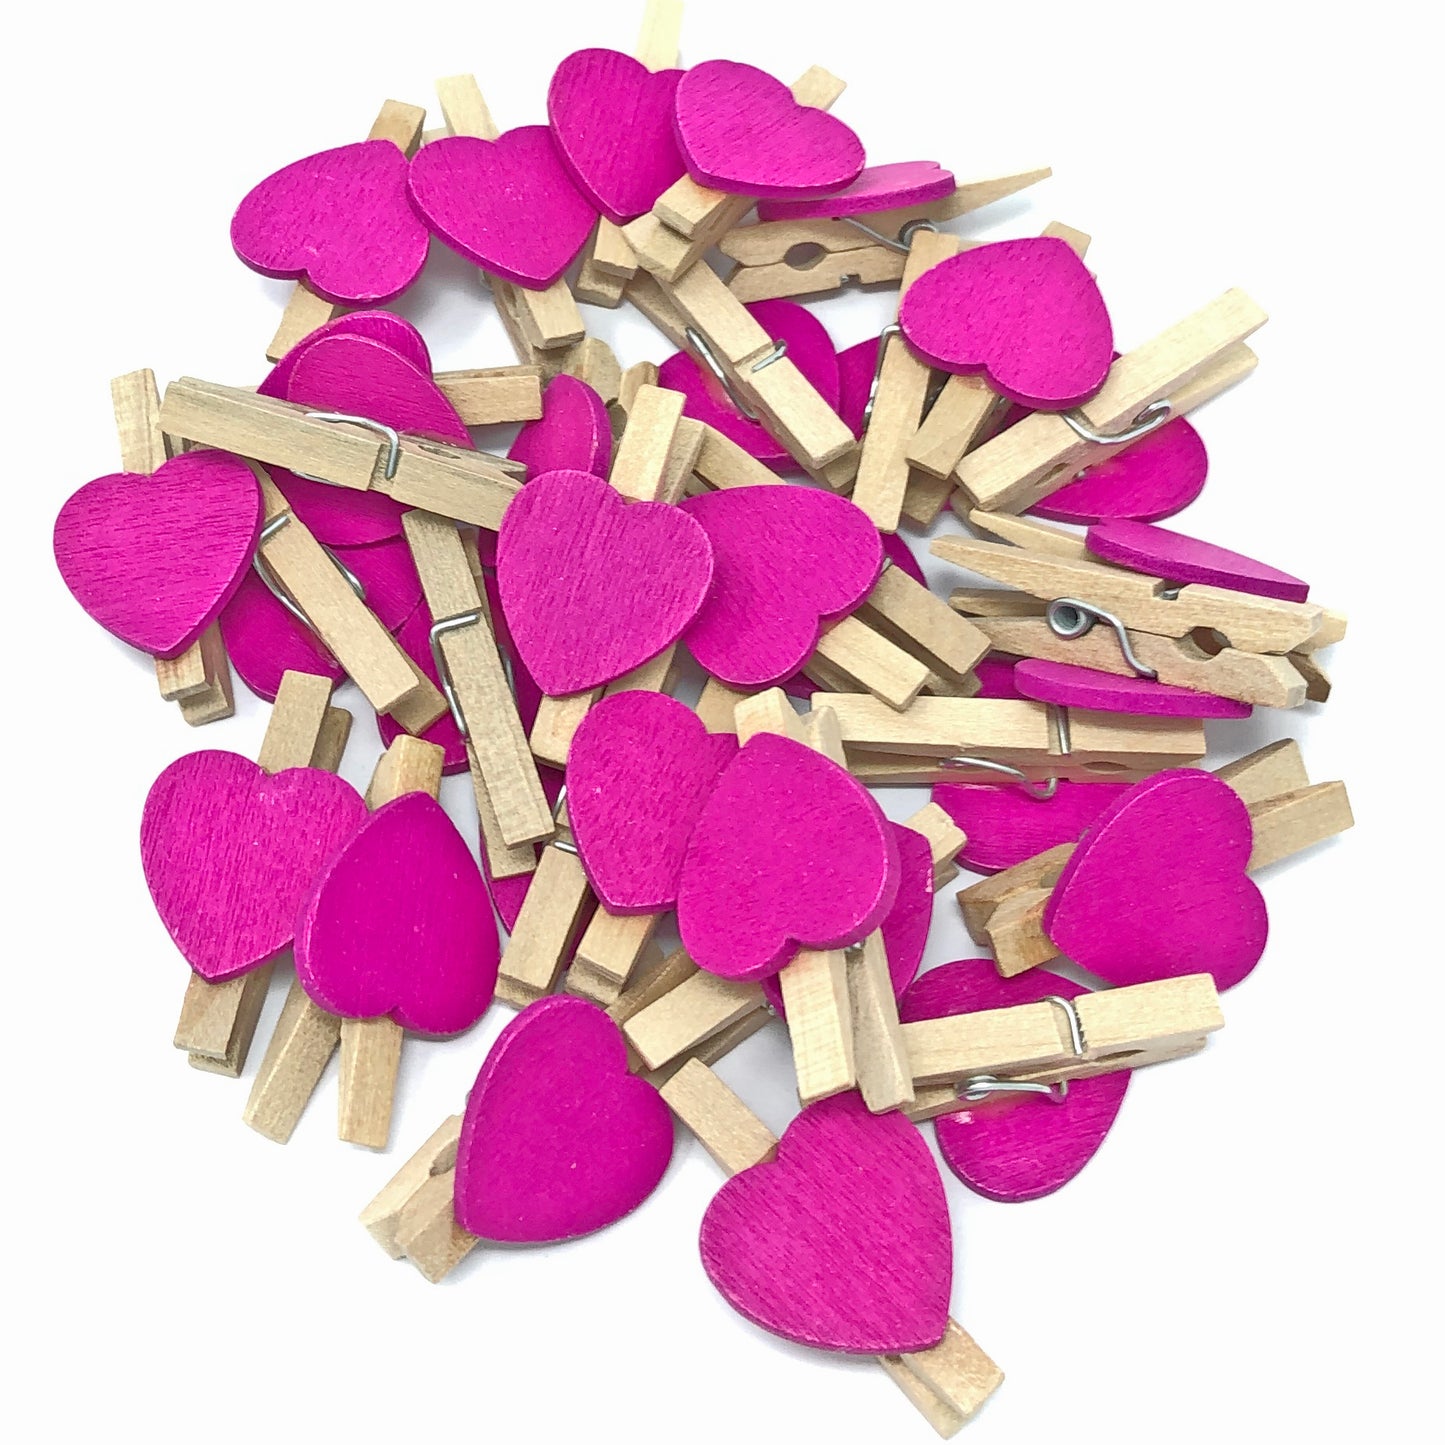 Bright Pink 30mm Natural Pegs with 18mm Coloured Hearts